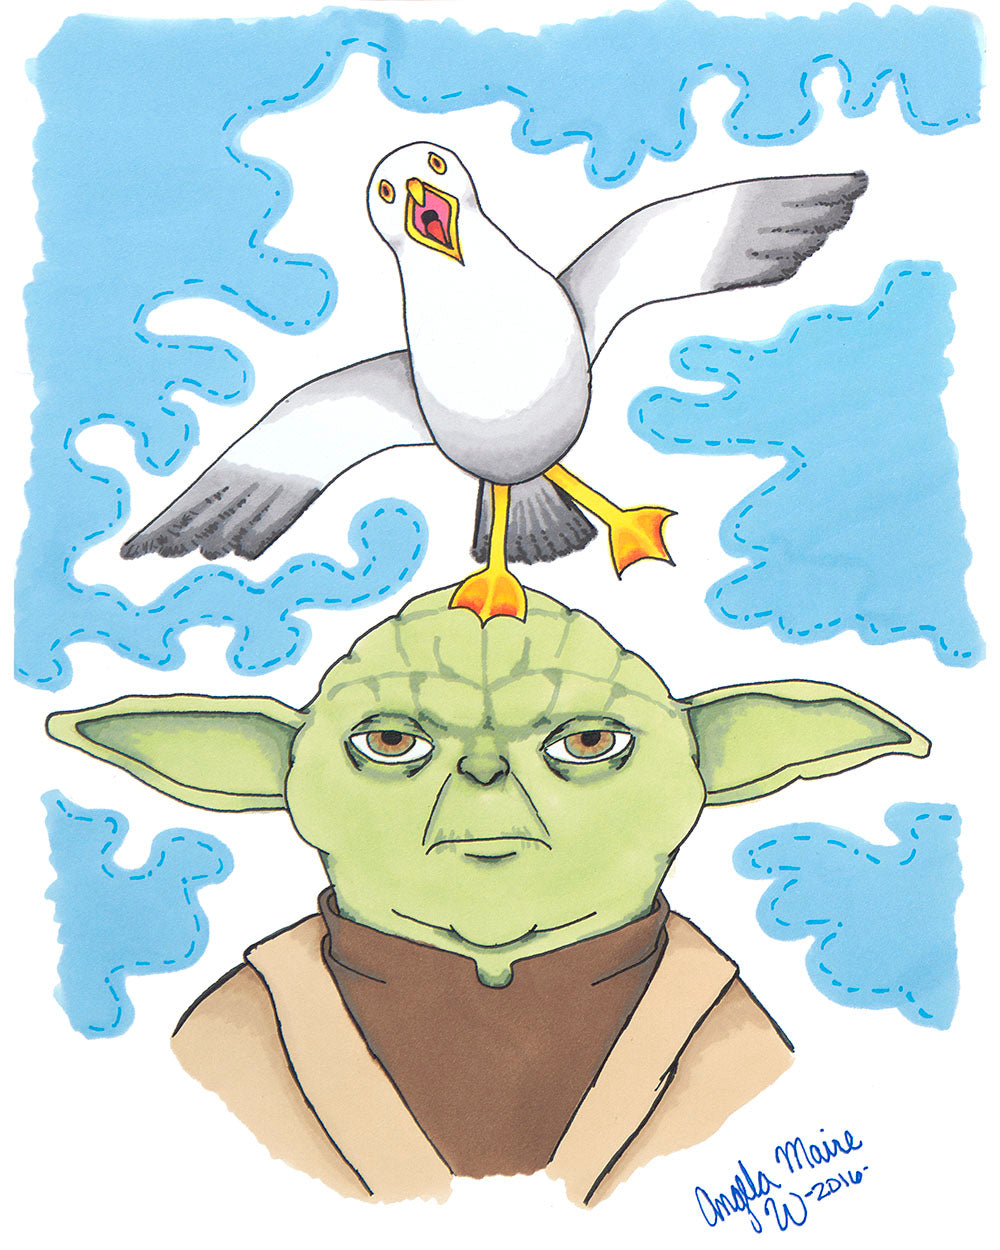 Yoda and the Seagulls